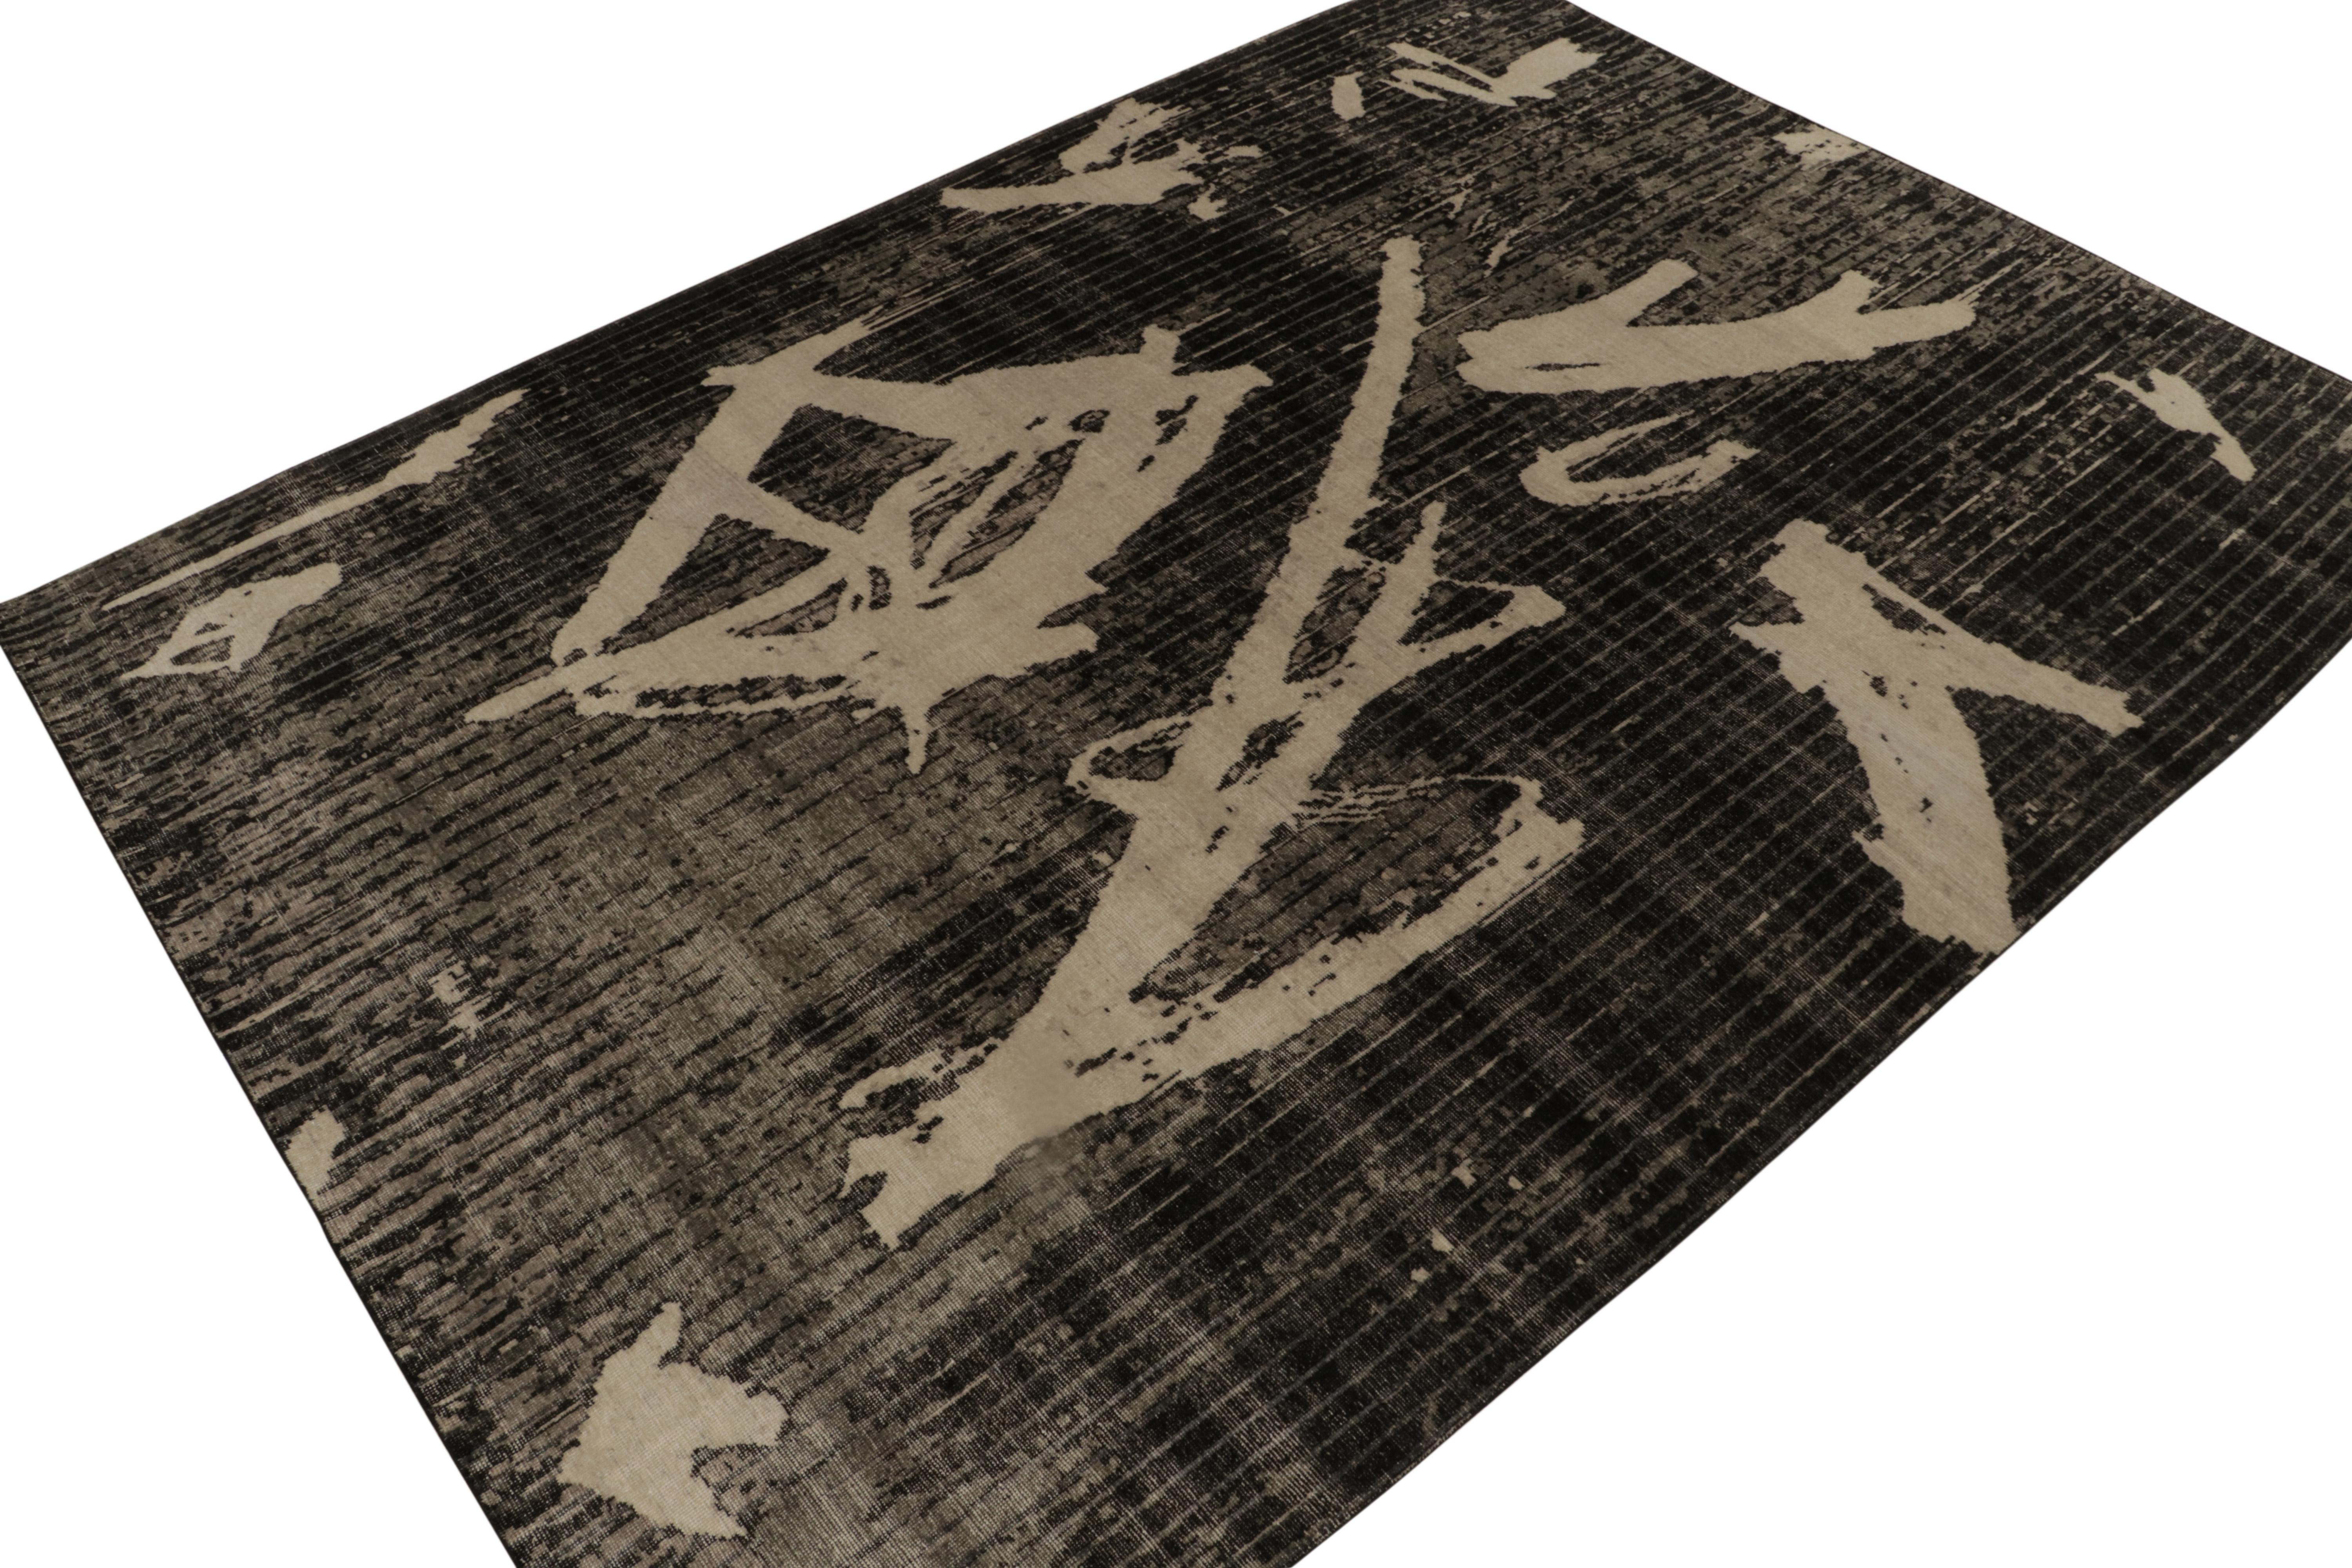 A 10x14 hand-knotted wool rug from Rug & Kilim’s Homage Collection—a smart encyclopedia of patterns and iconic aesthetics. 

On the Design: This contemporary vision boasts abstract expressionism uniquely minimal in grayish white on black with a